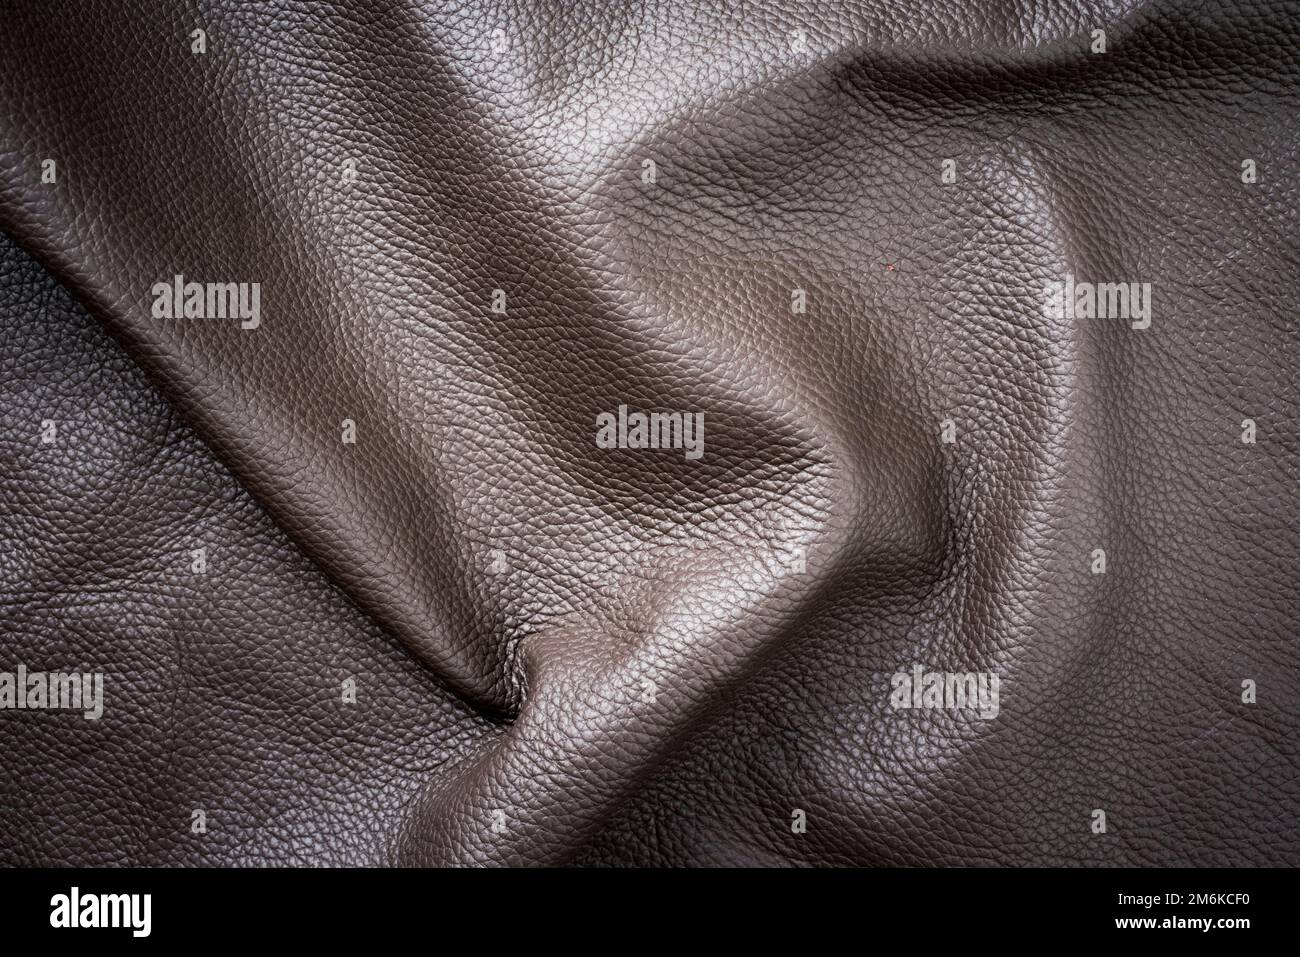 https://c8.alamy.com/comp/2M6KCF0/brown-genuine-vintage-wavy-leather-as-background-wallpaper-with-copy-space-2M6KCF0.jpg